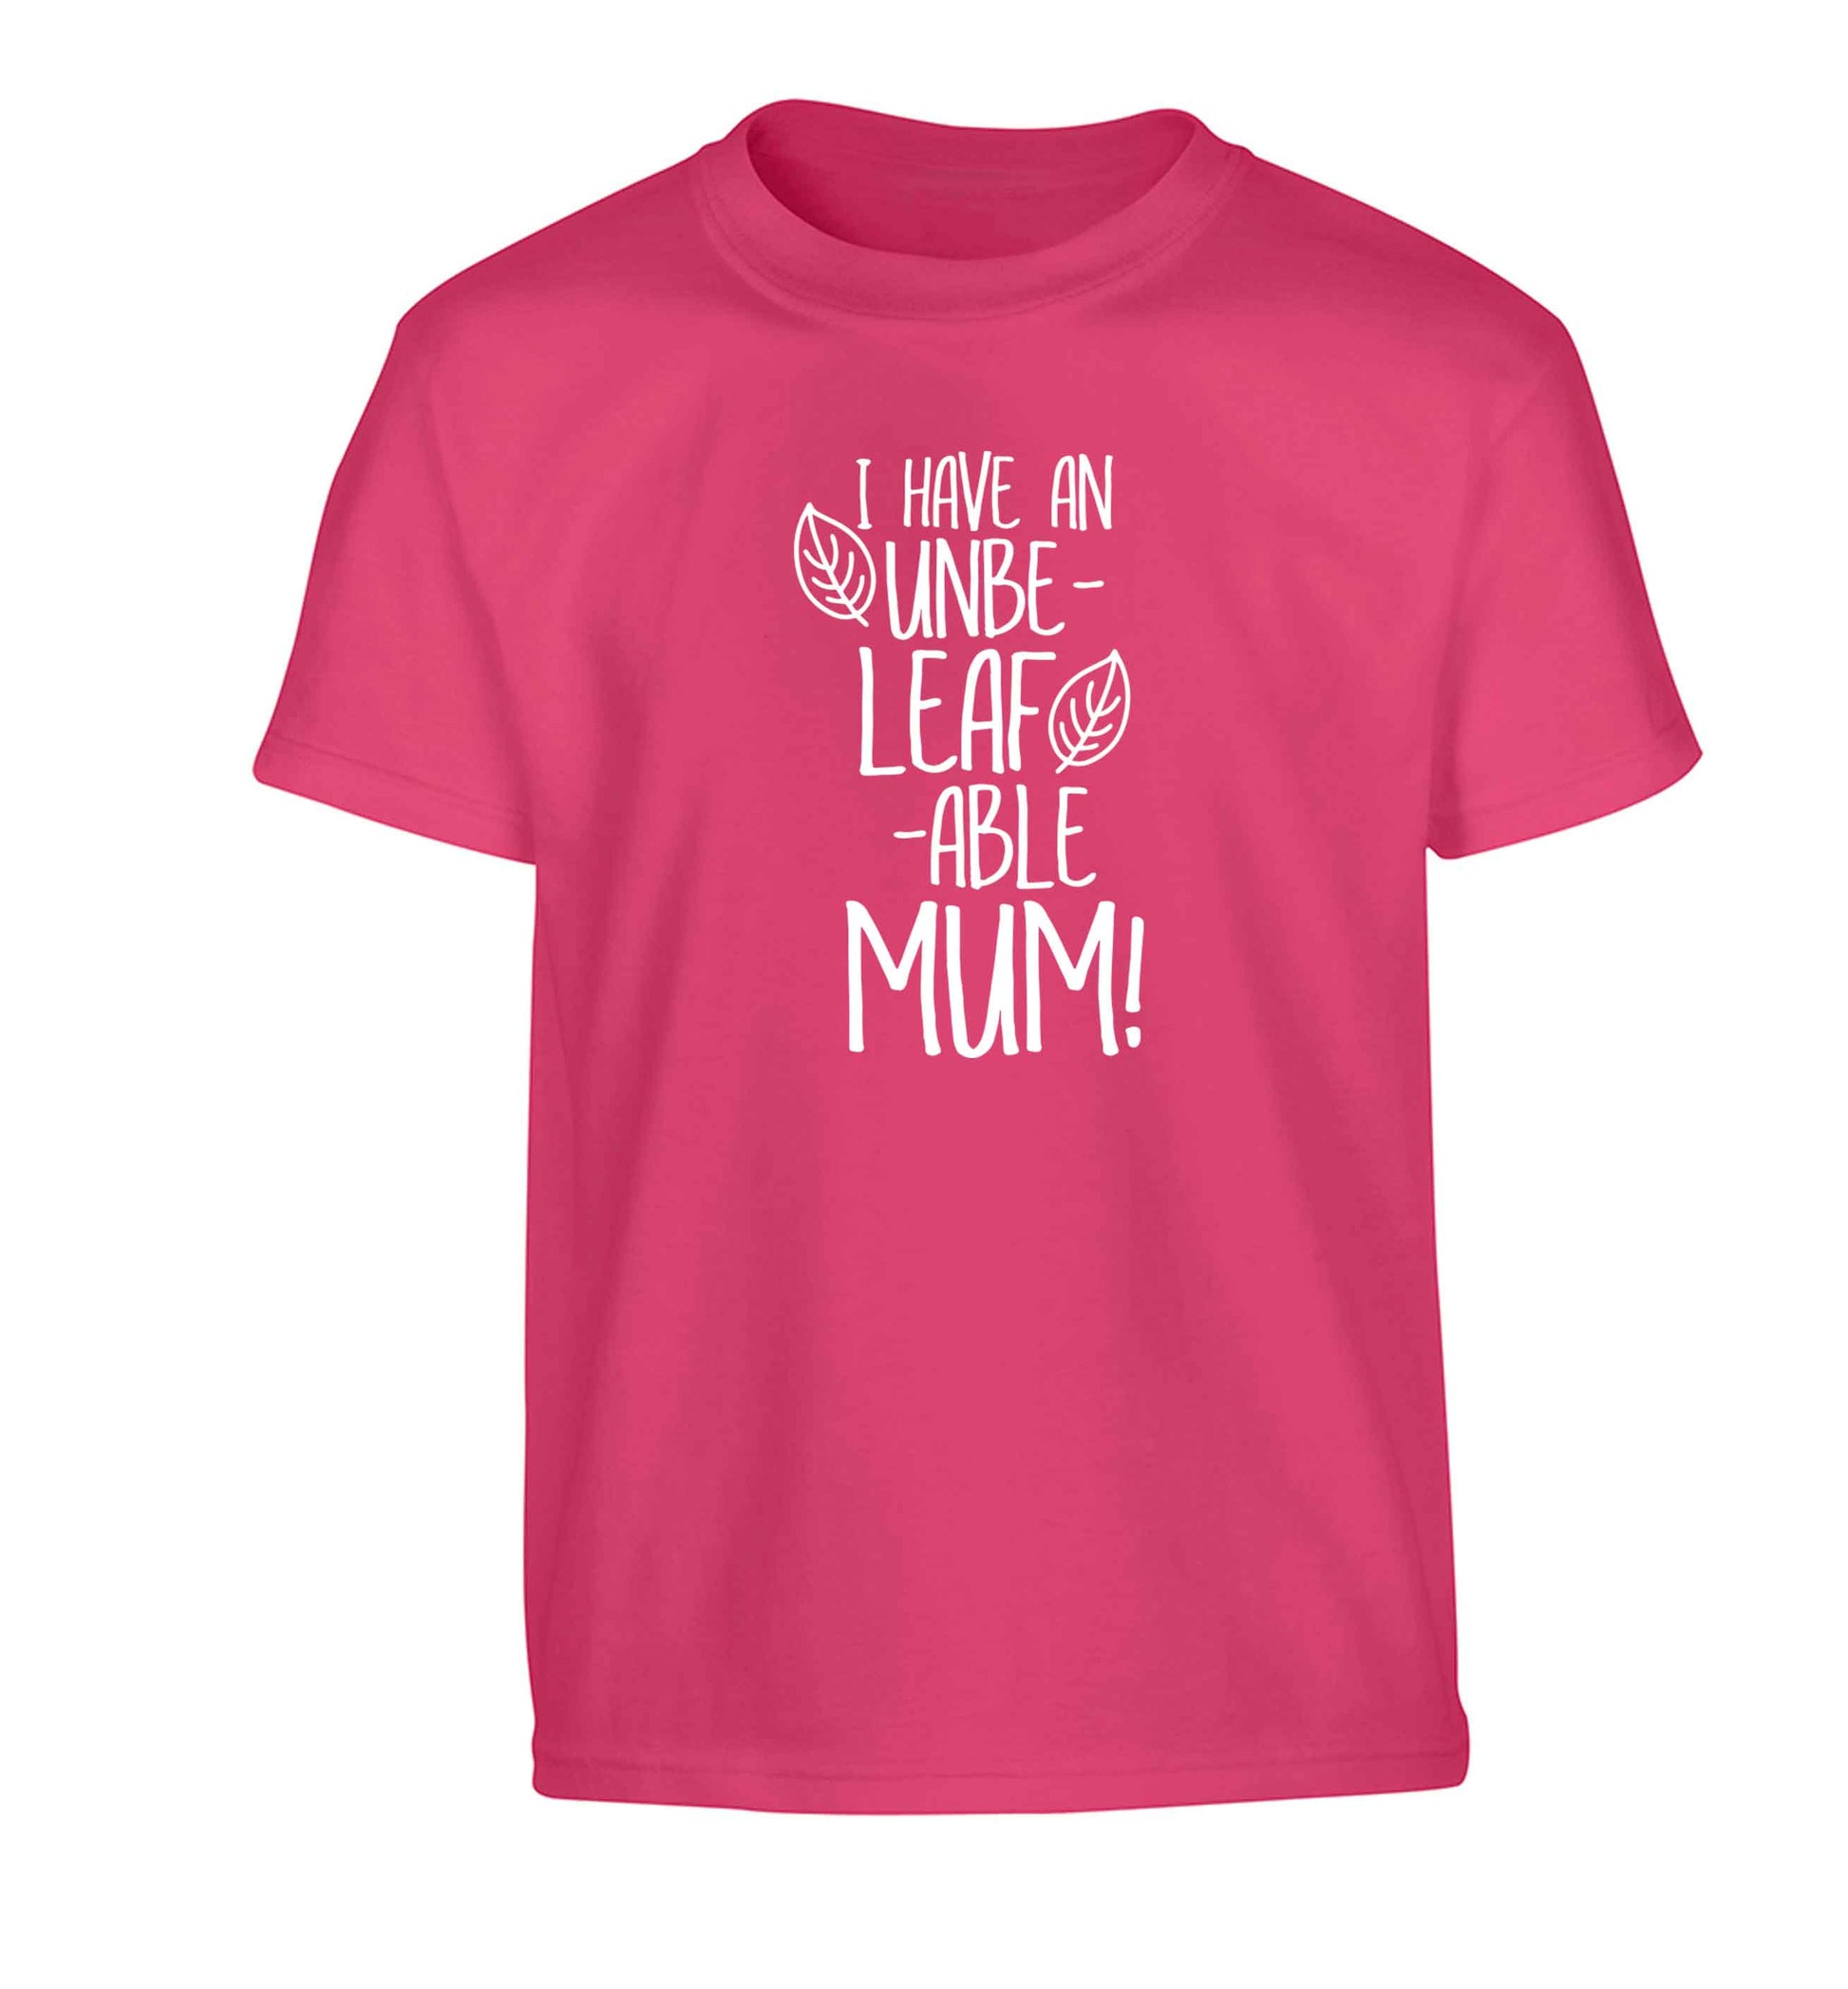 I have an unbeleafable mum! Children's pink Tshirt 12-13 Years